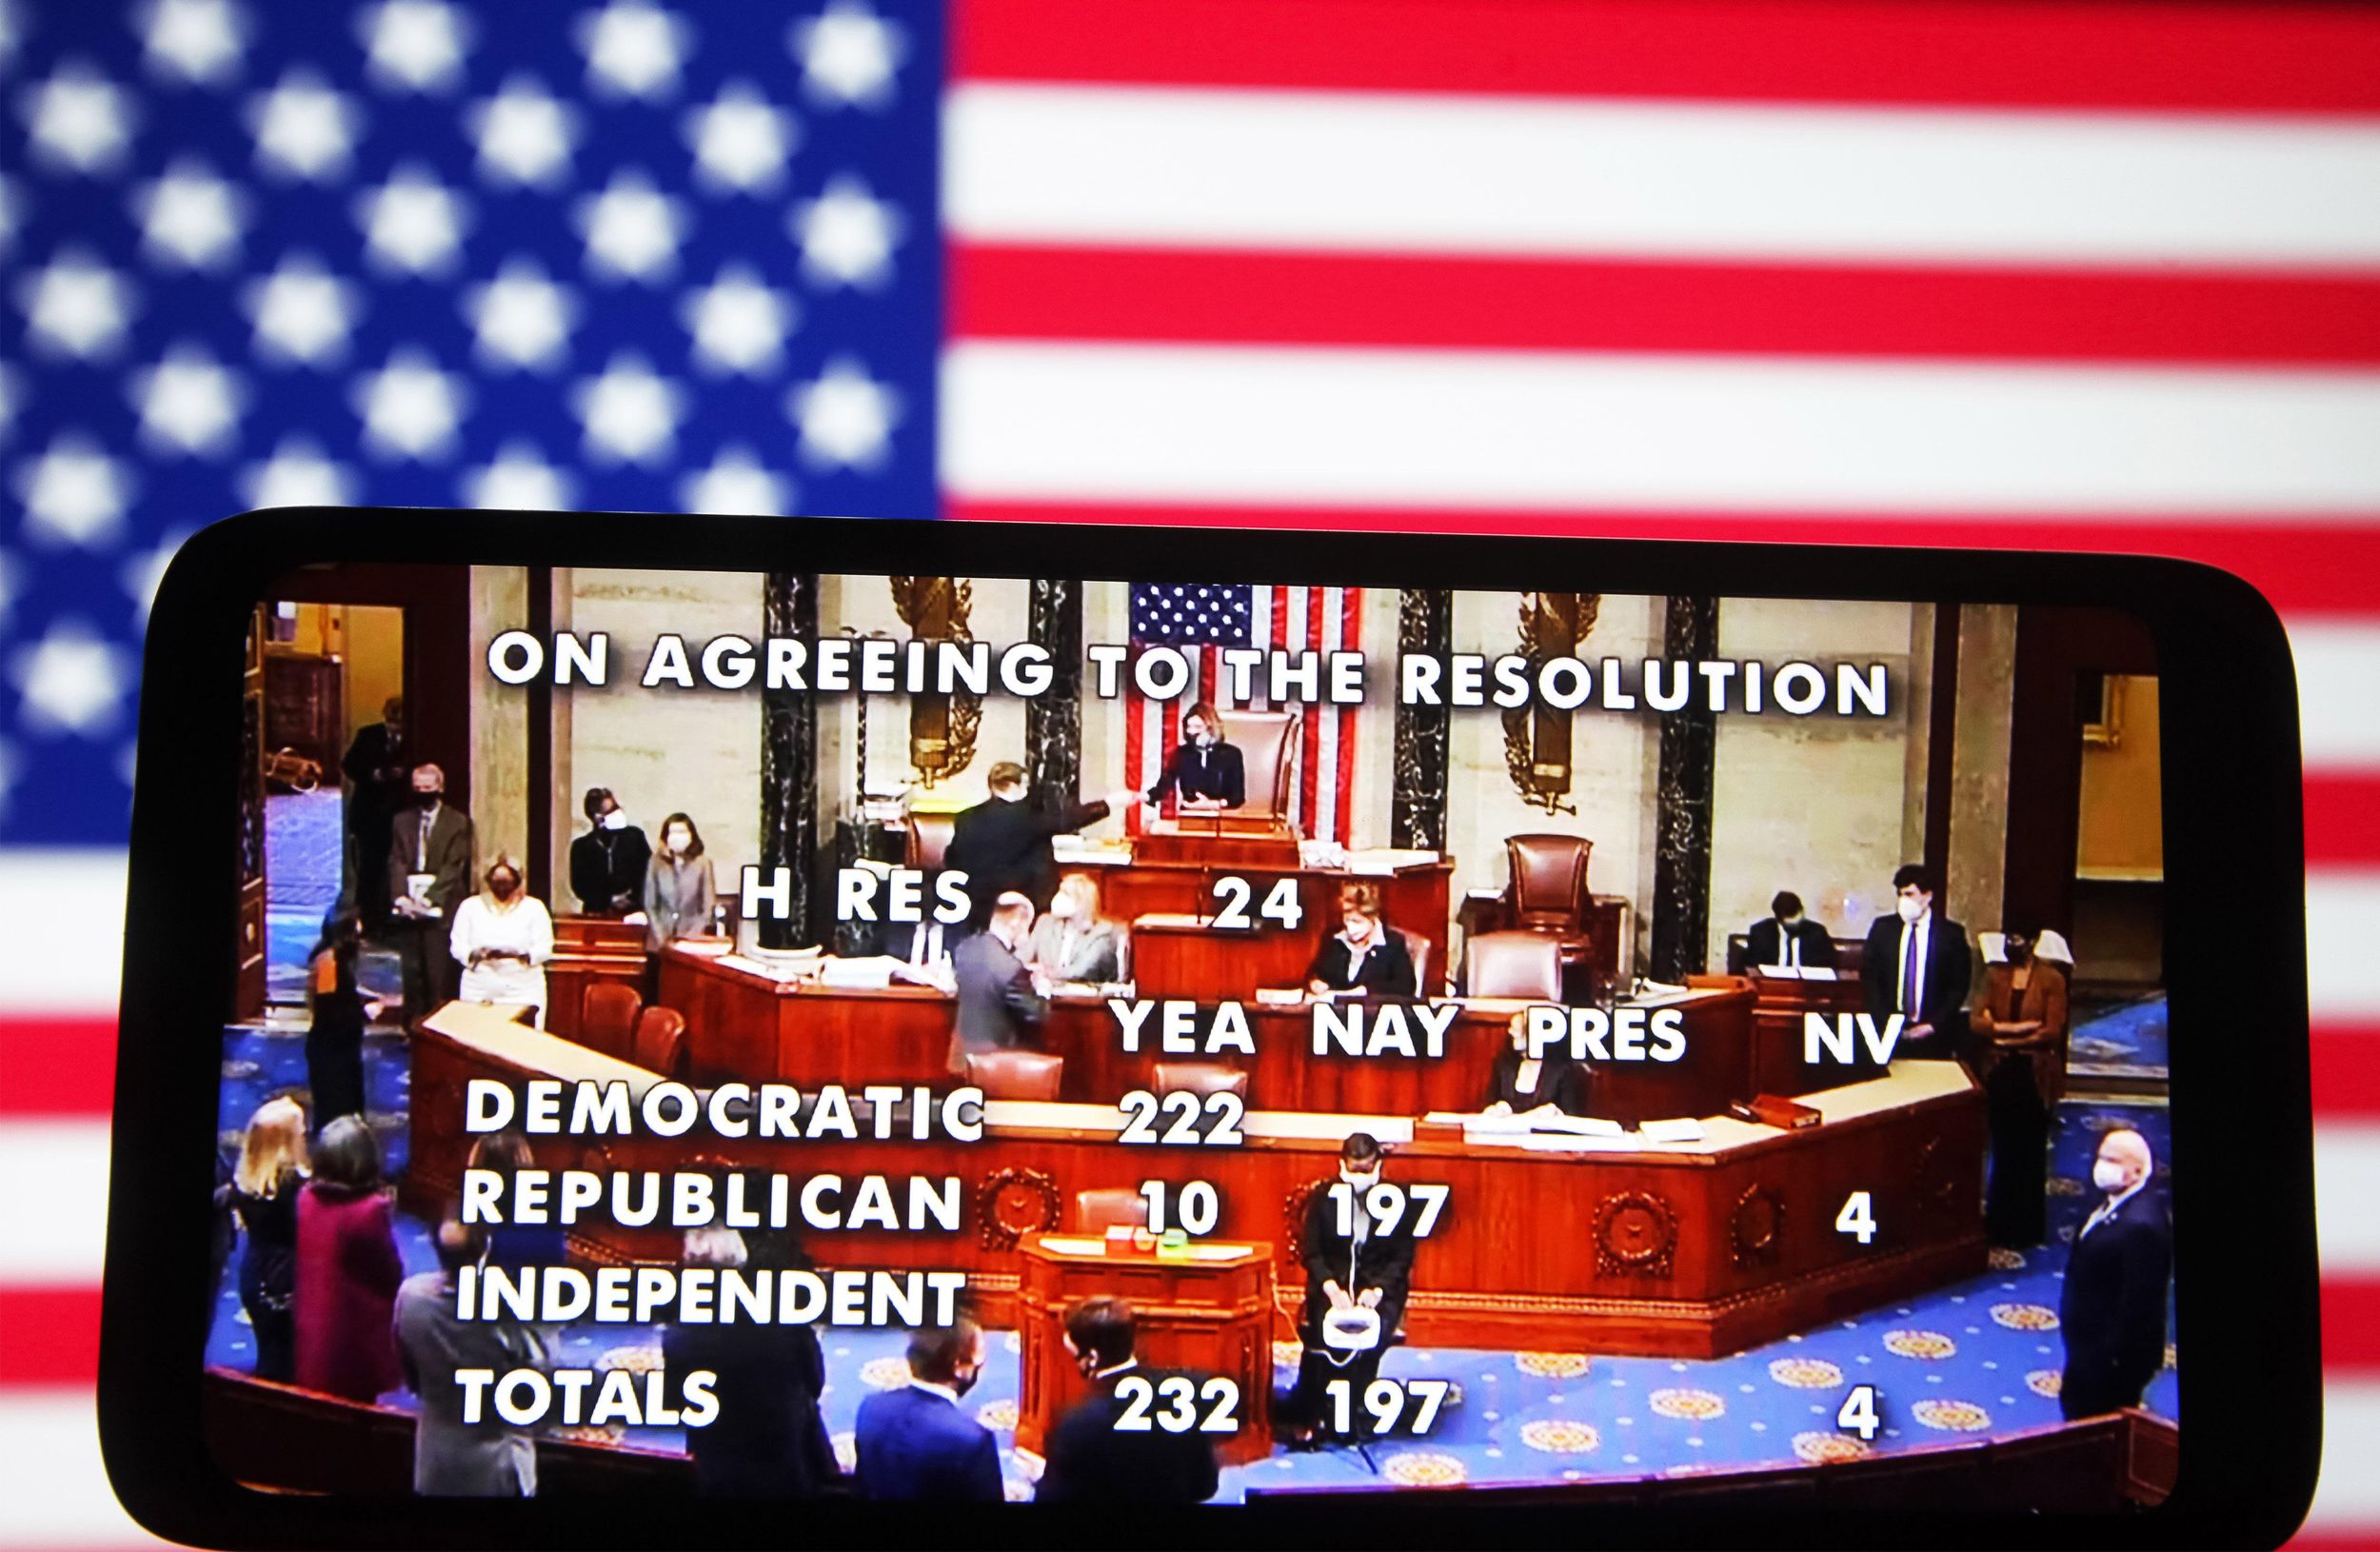 oting result of the House of Representatives is seen during the vote to impeach U.S. President Donald Trump in Washington, US., on this frame from a video displayed on a smartphone screen in front the US flag. 